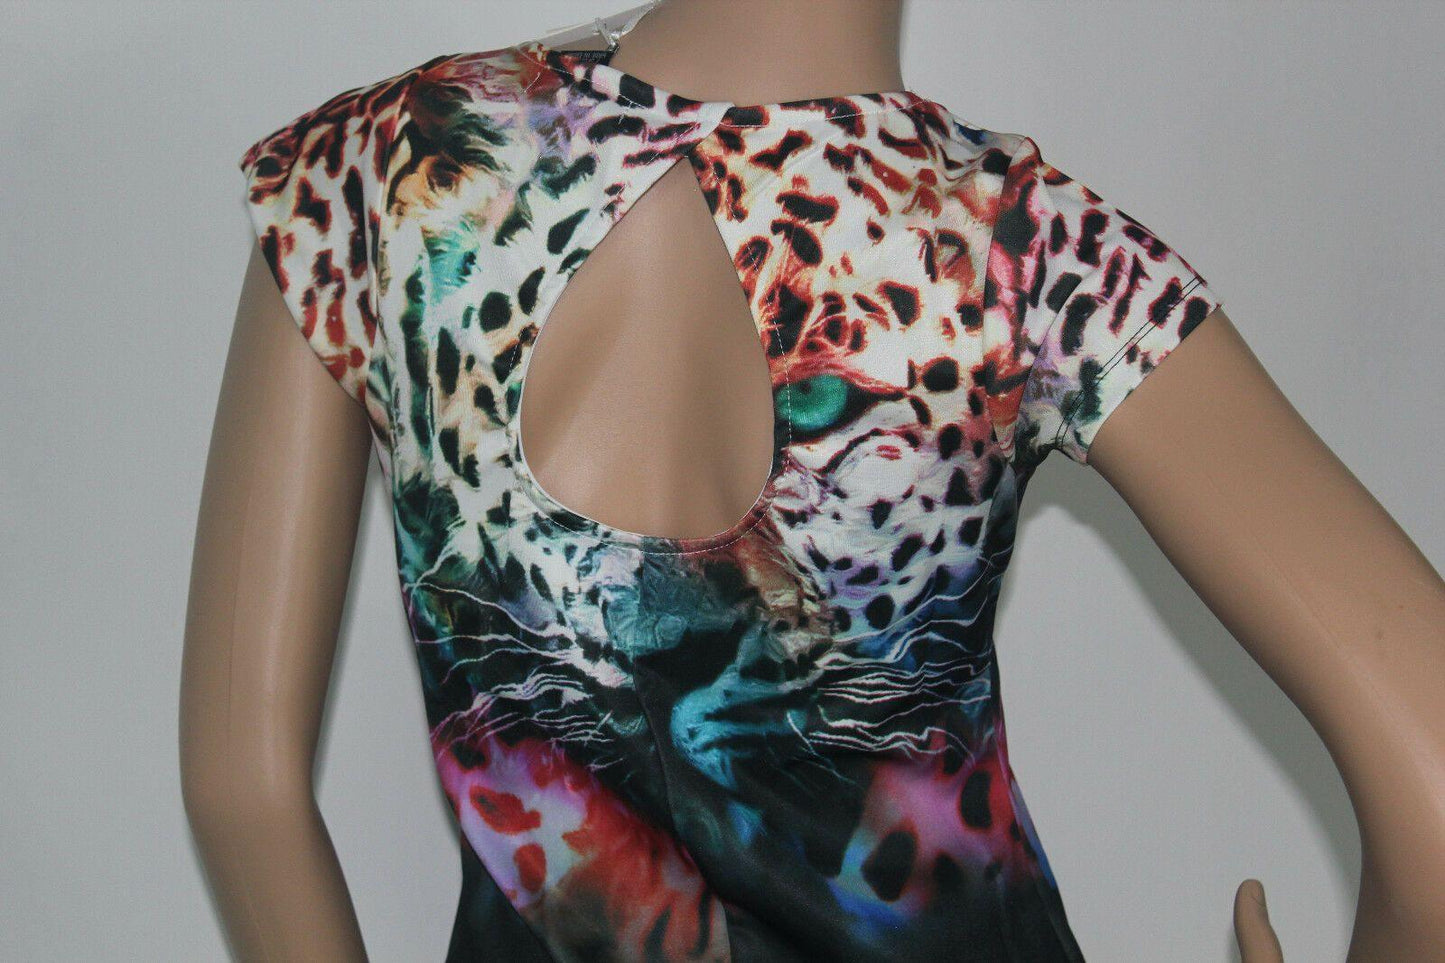 5th & LOVE  Cut Out Back Women's Dress Tiger Multi-Color Cap Sleeve  Size M - SVNYFancy